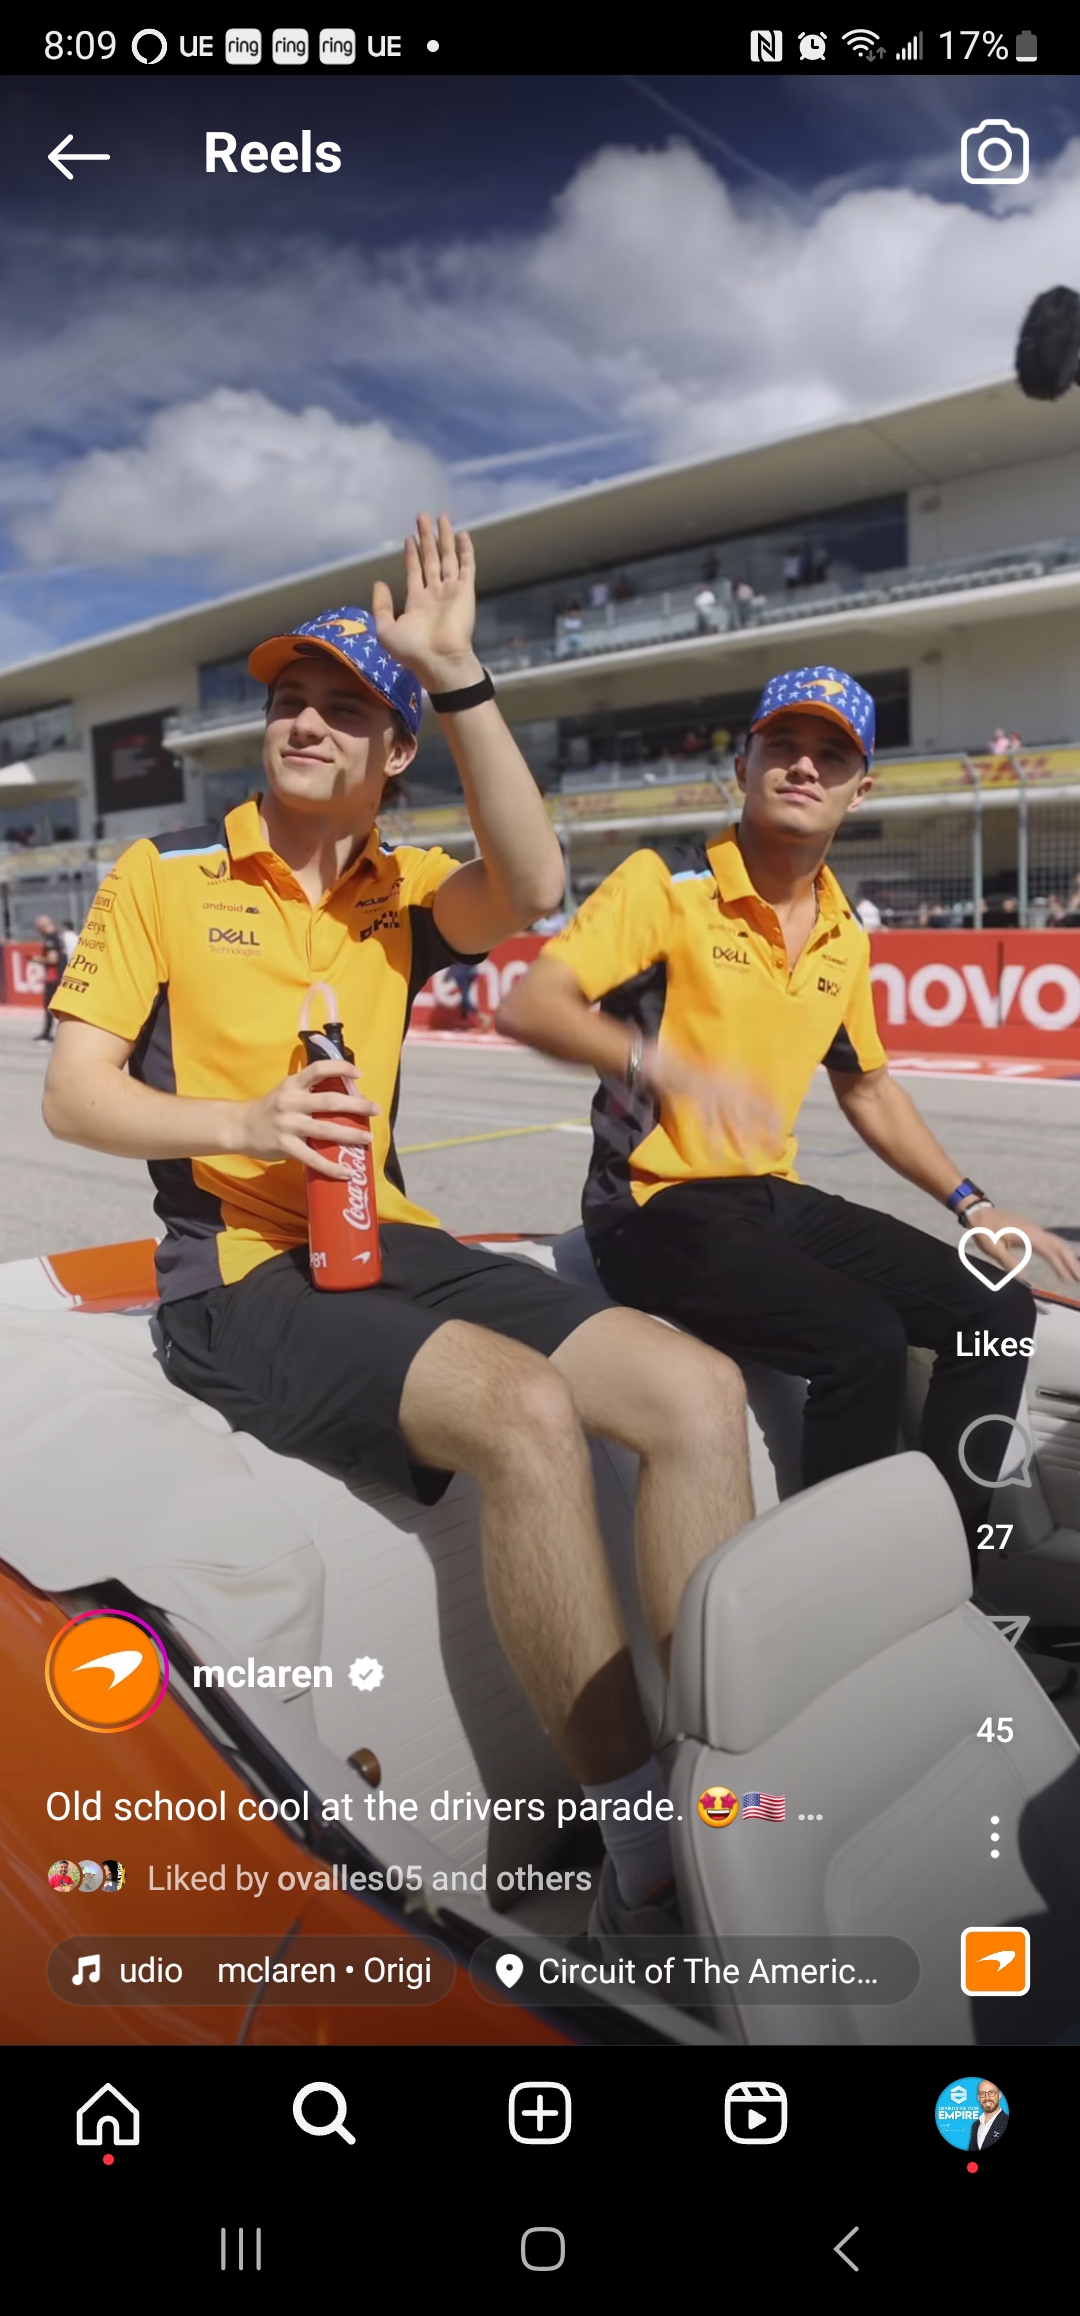 Two McLaren F1 team members, clad in team colors, participate in a drivers parade in Austin, waving at the crowd.